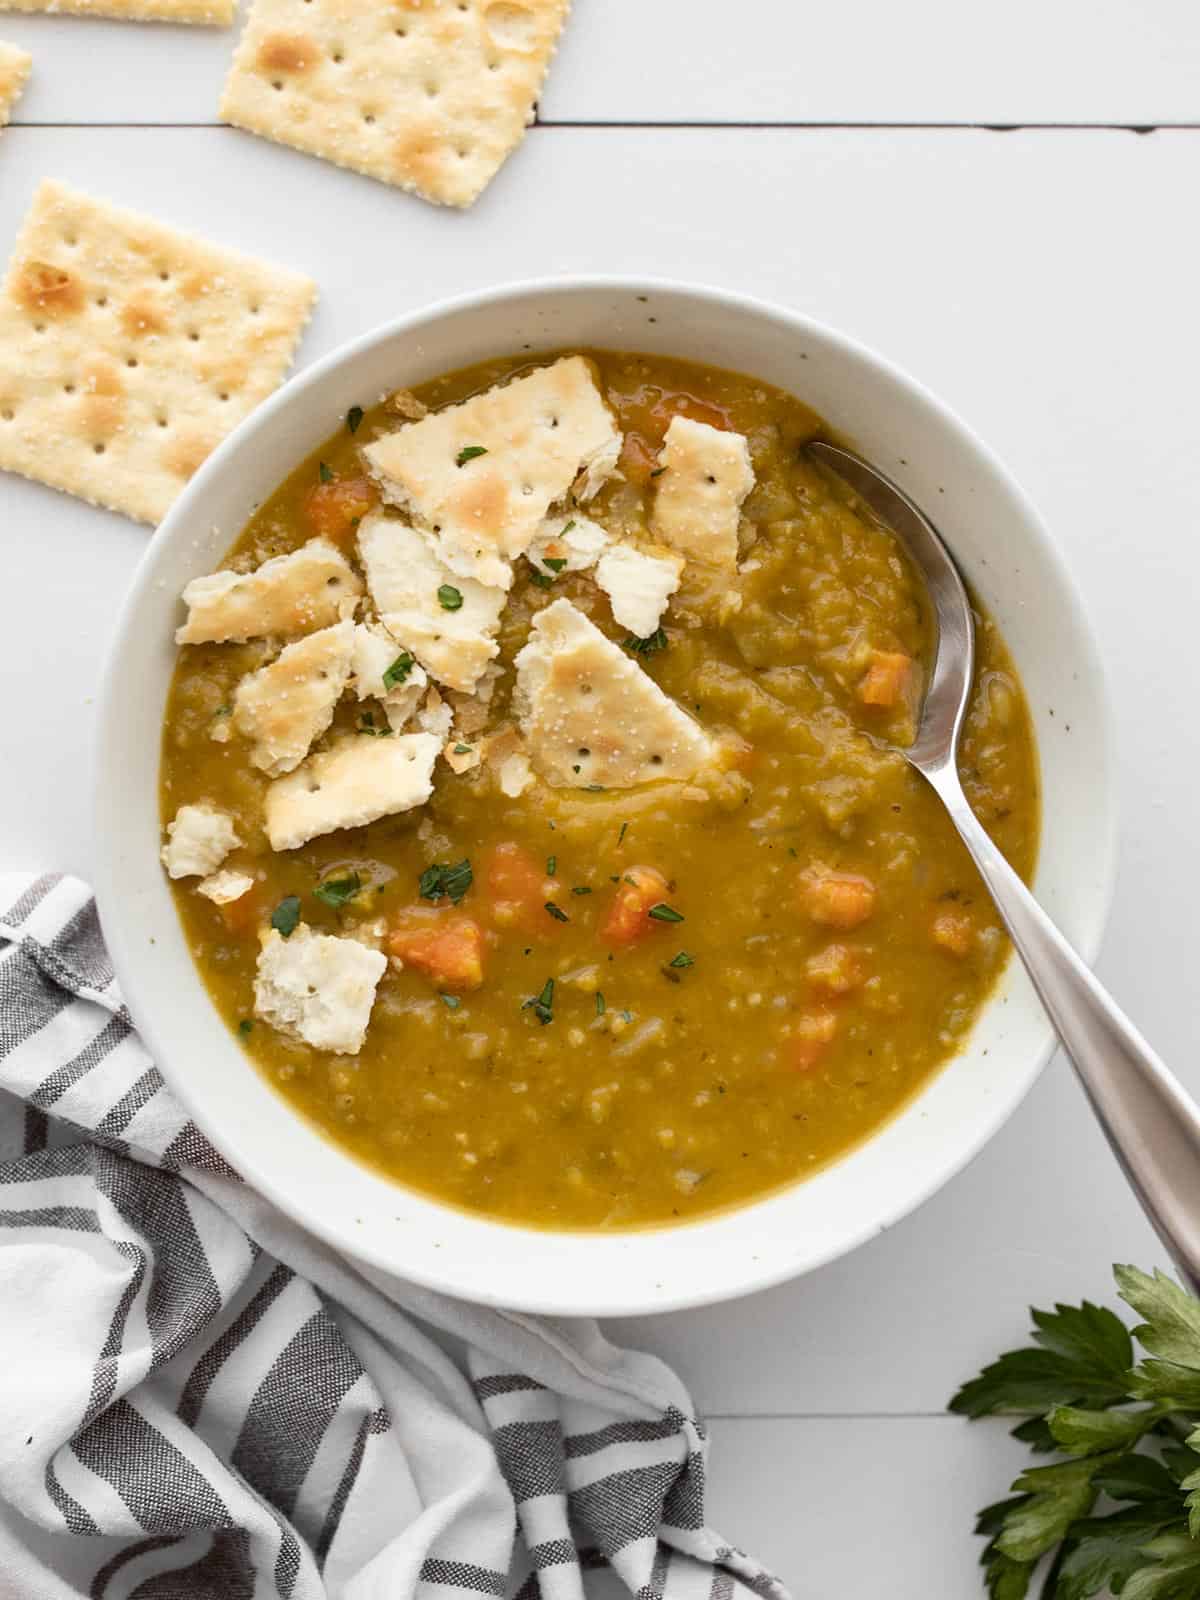 Overhead view of a bowl of split pea soup with saltine crackers